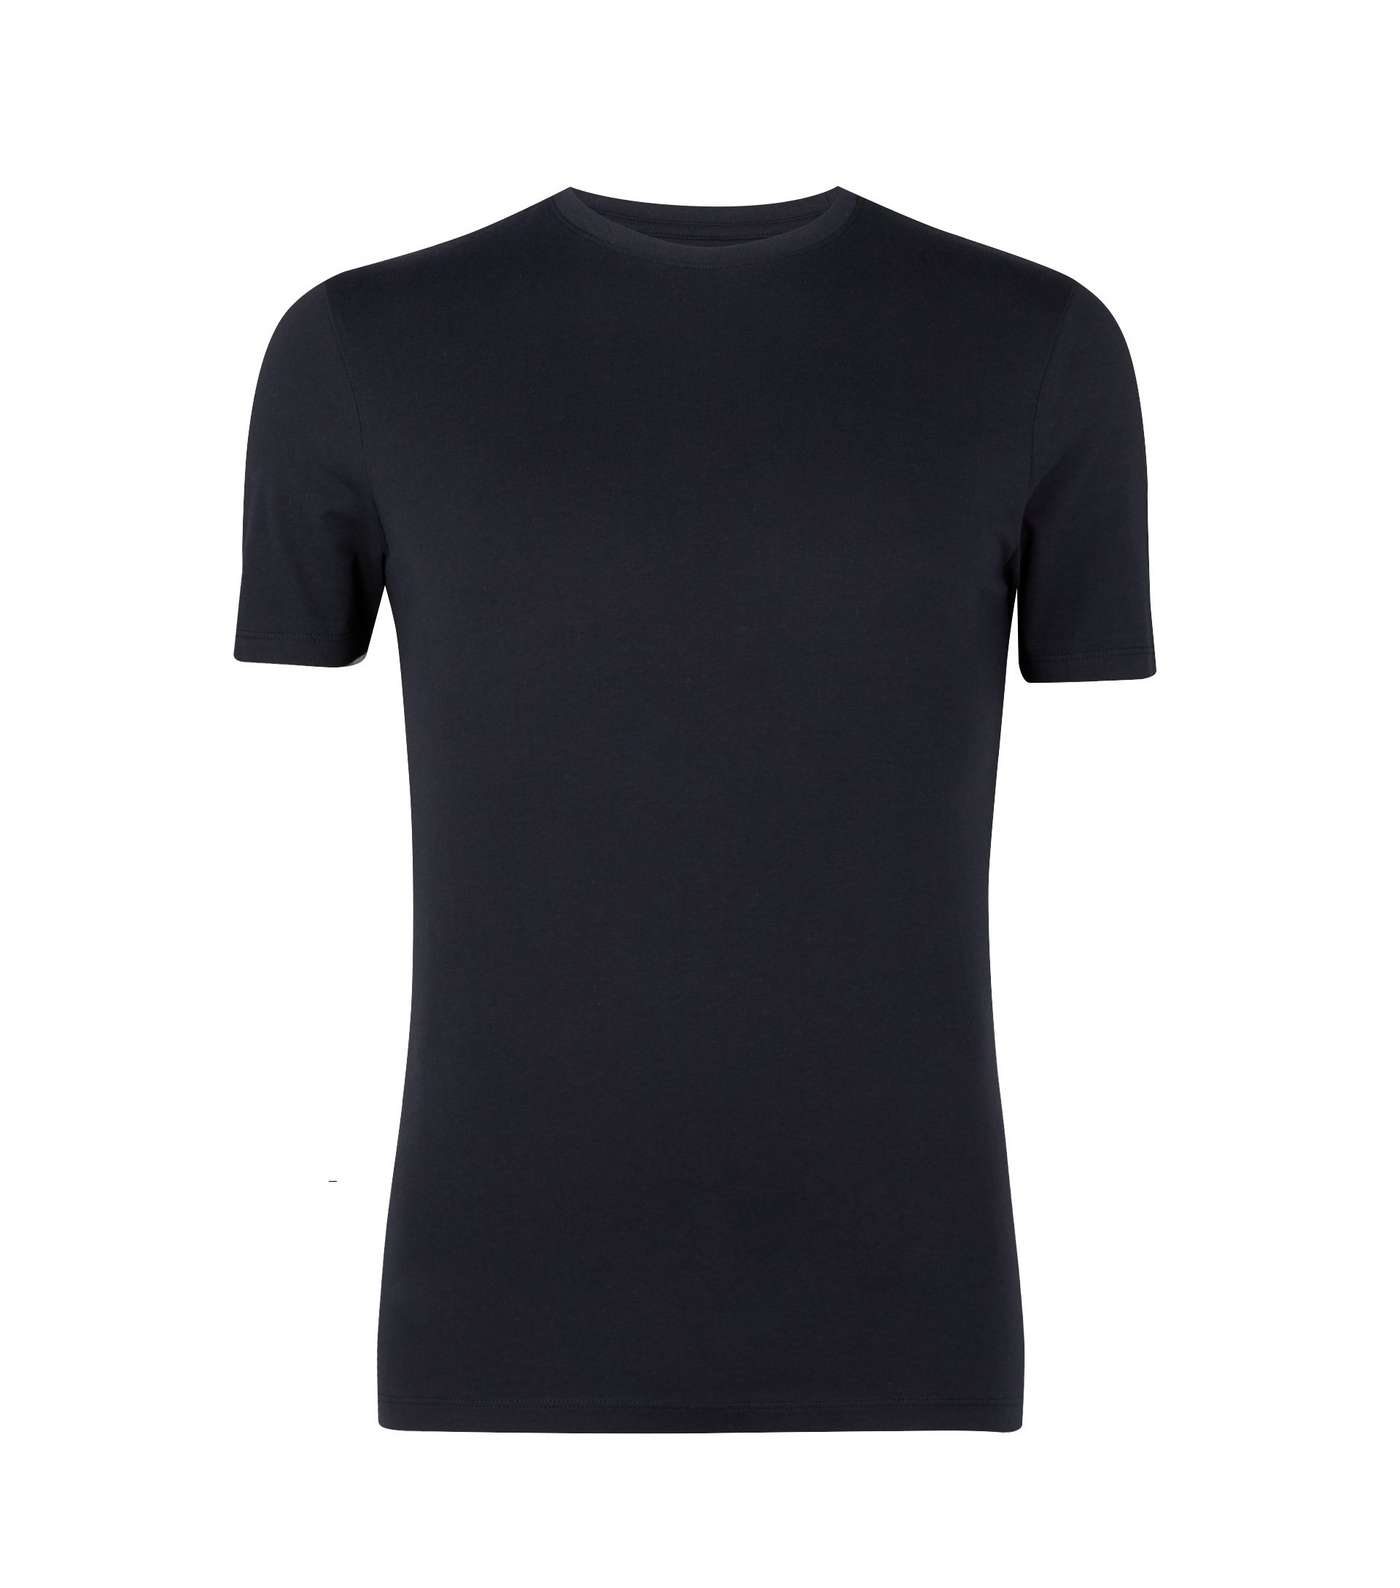 Navy Muscle Fit Cotton T-Shirt Image 5